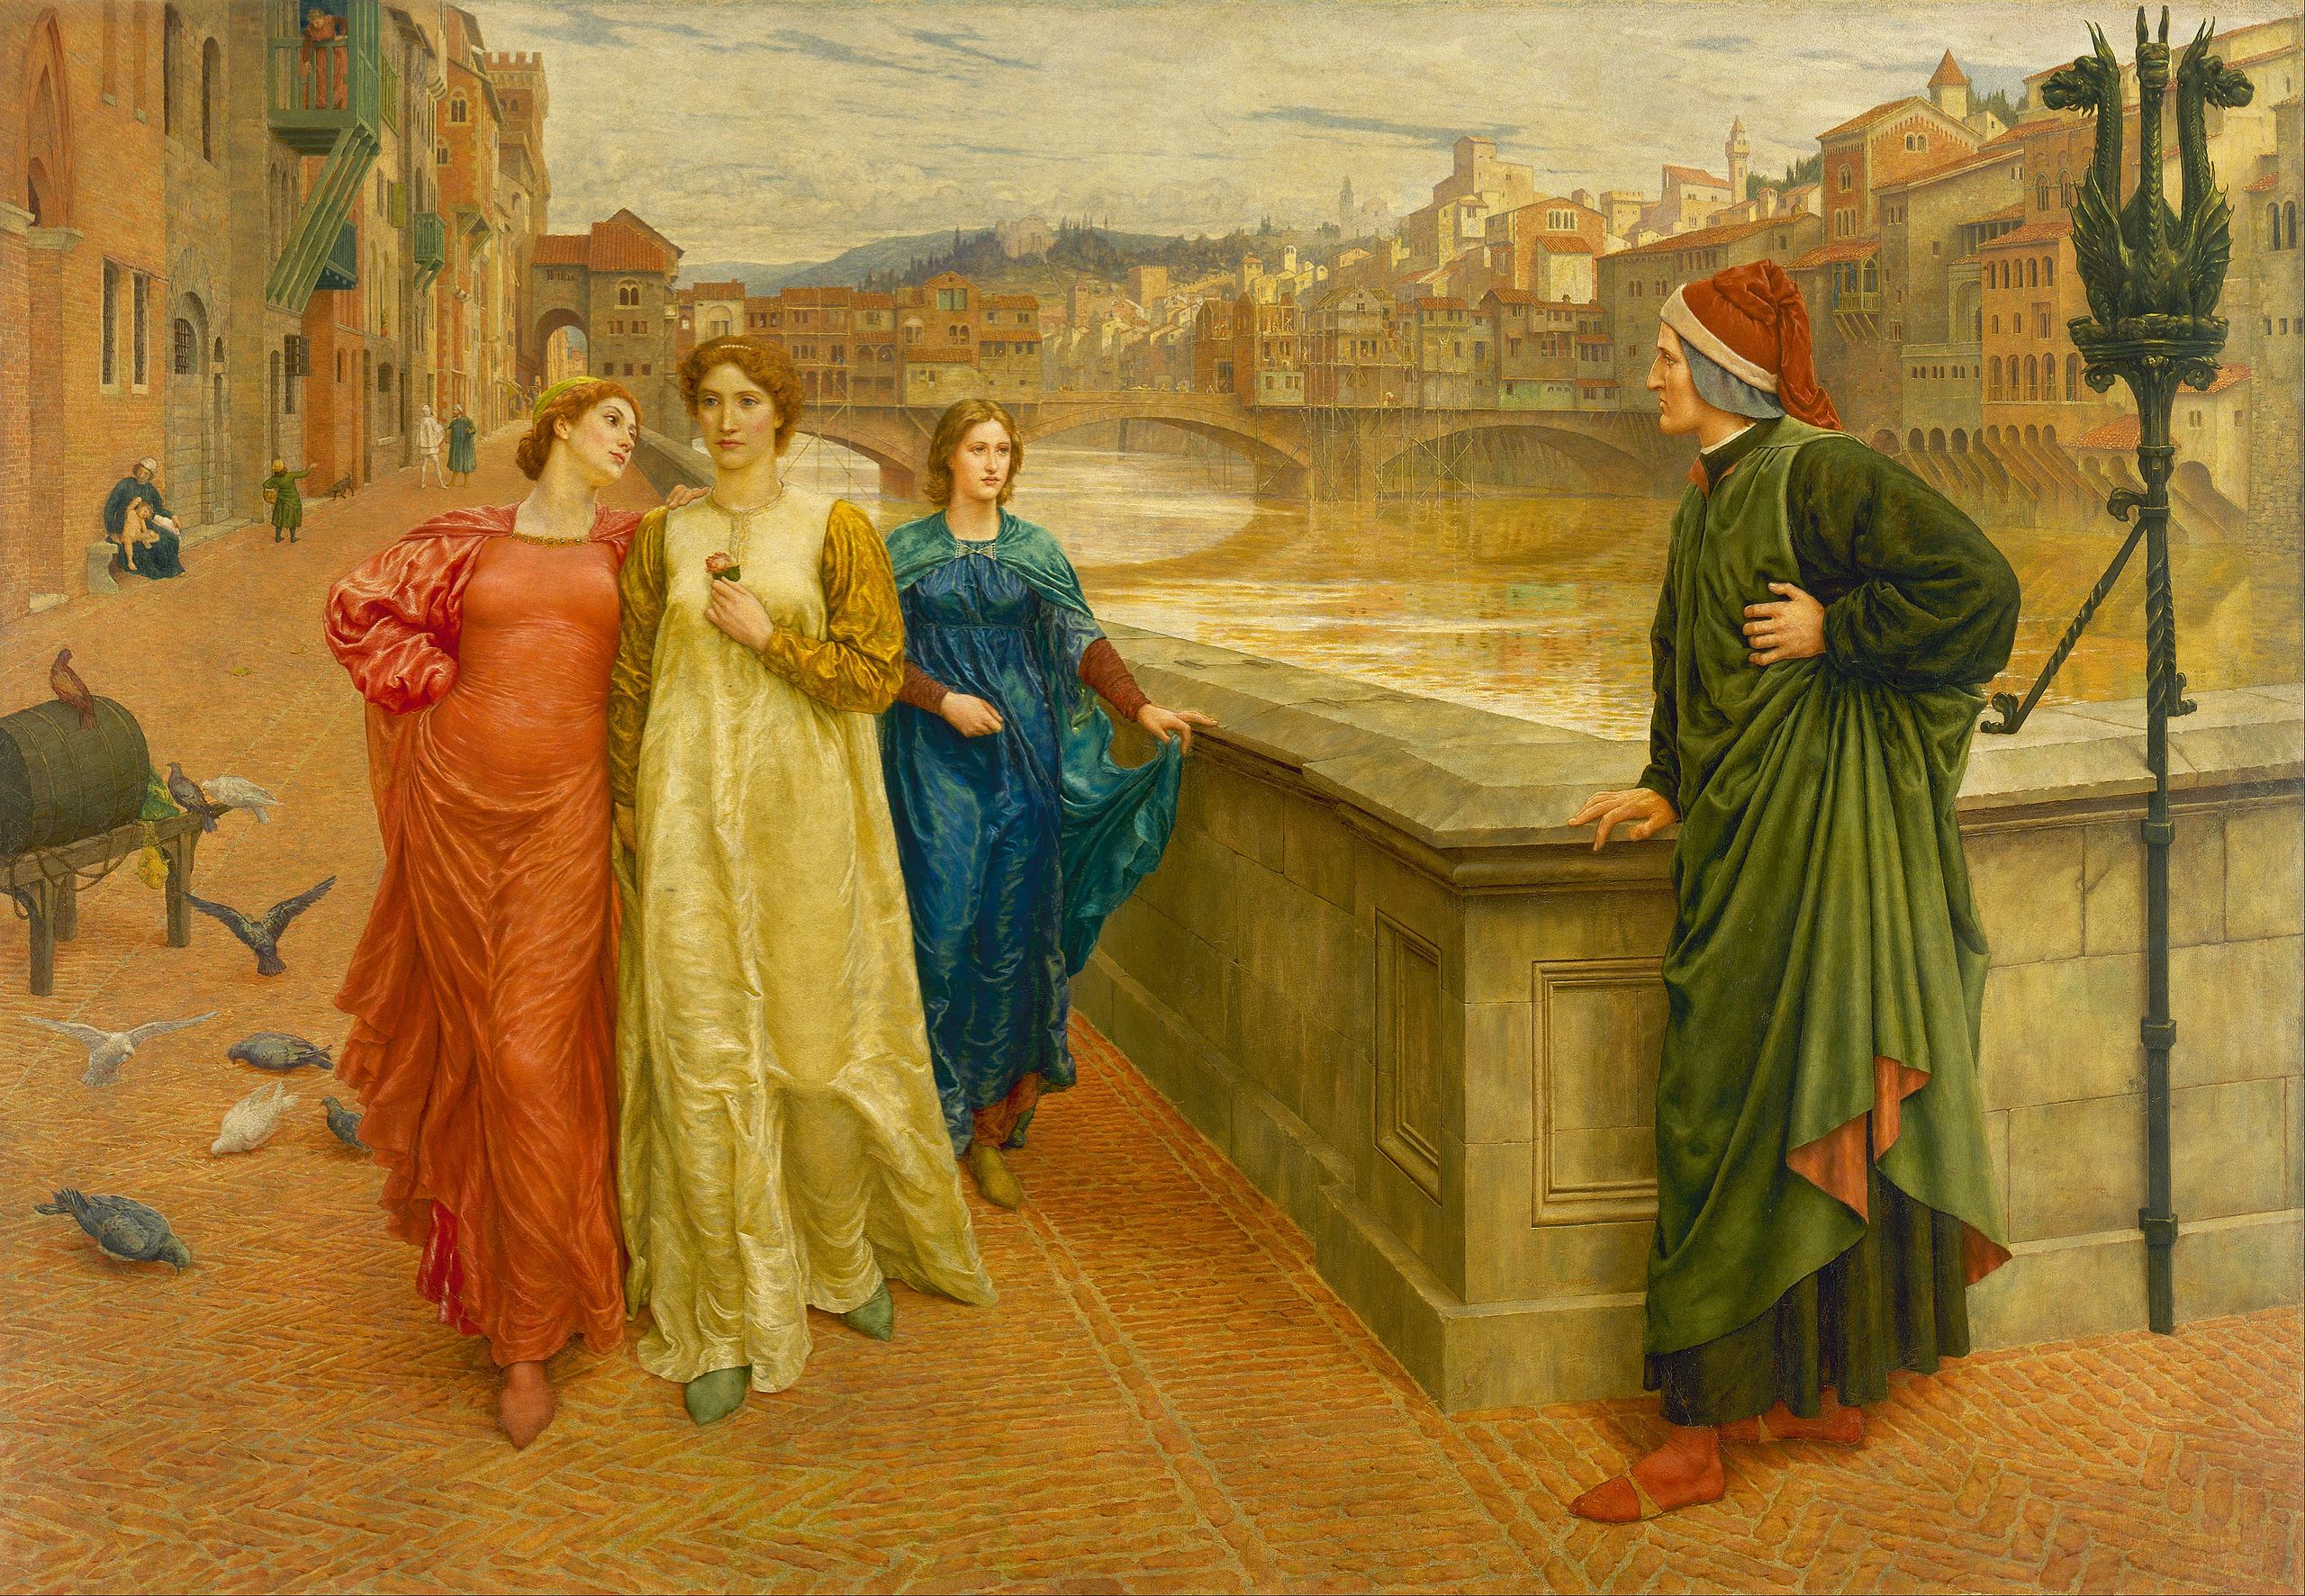 File:Inferno Canto 2 Beatrice bids Virgil on.jpg - Wikimedia Commons